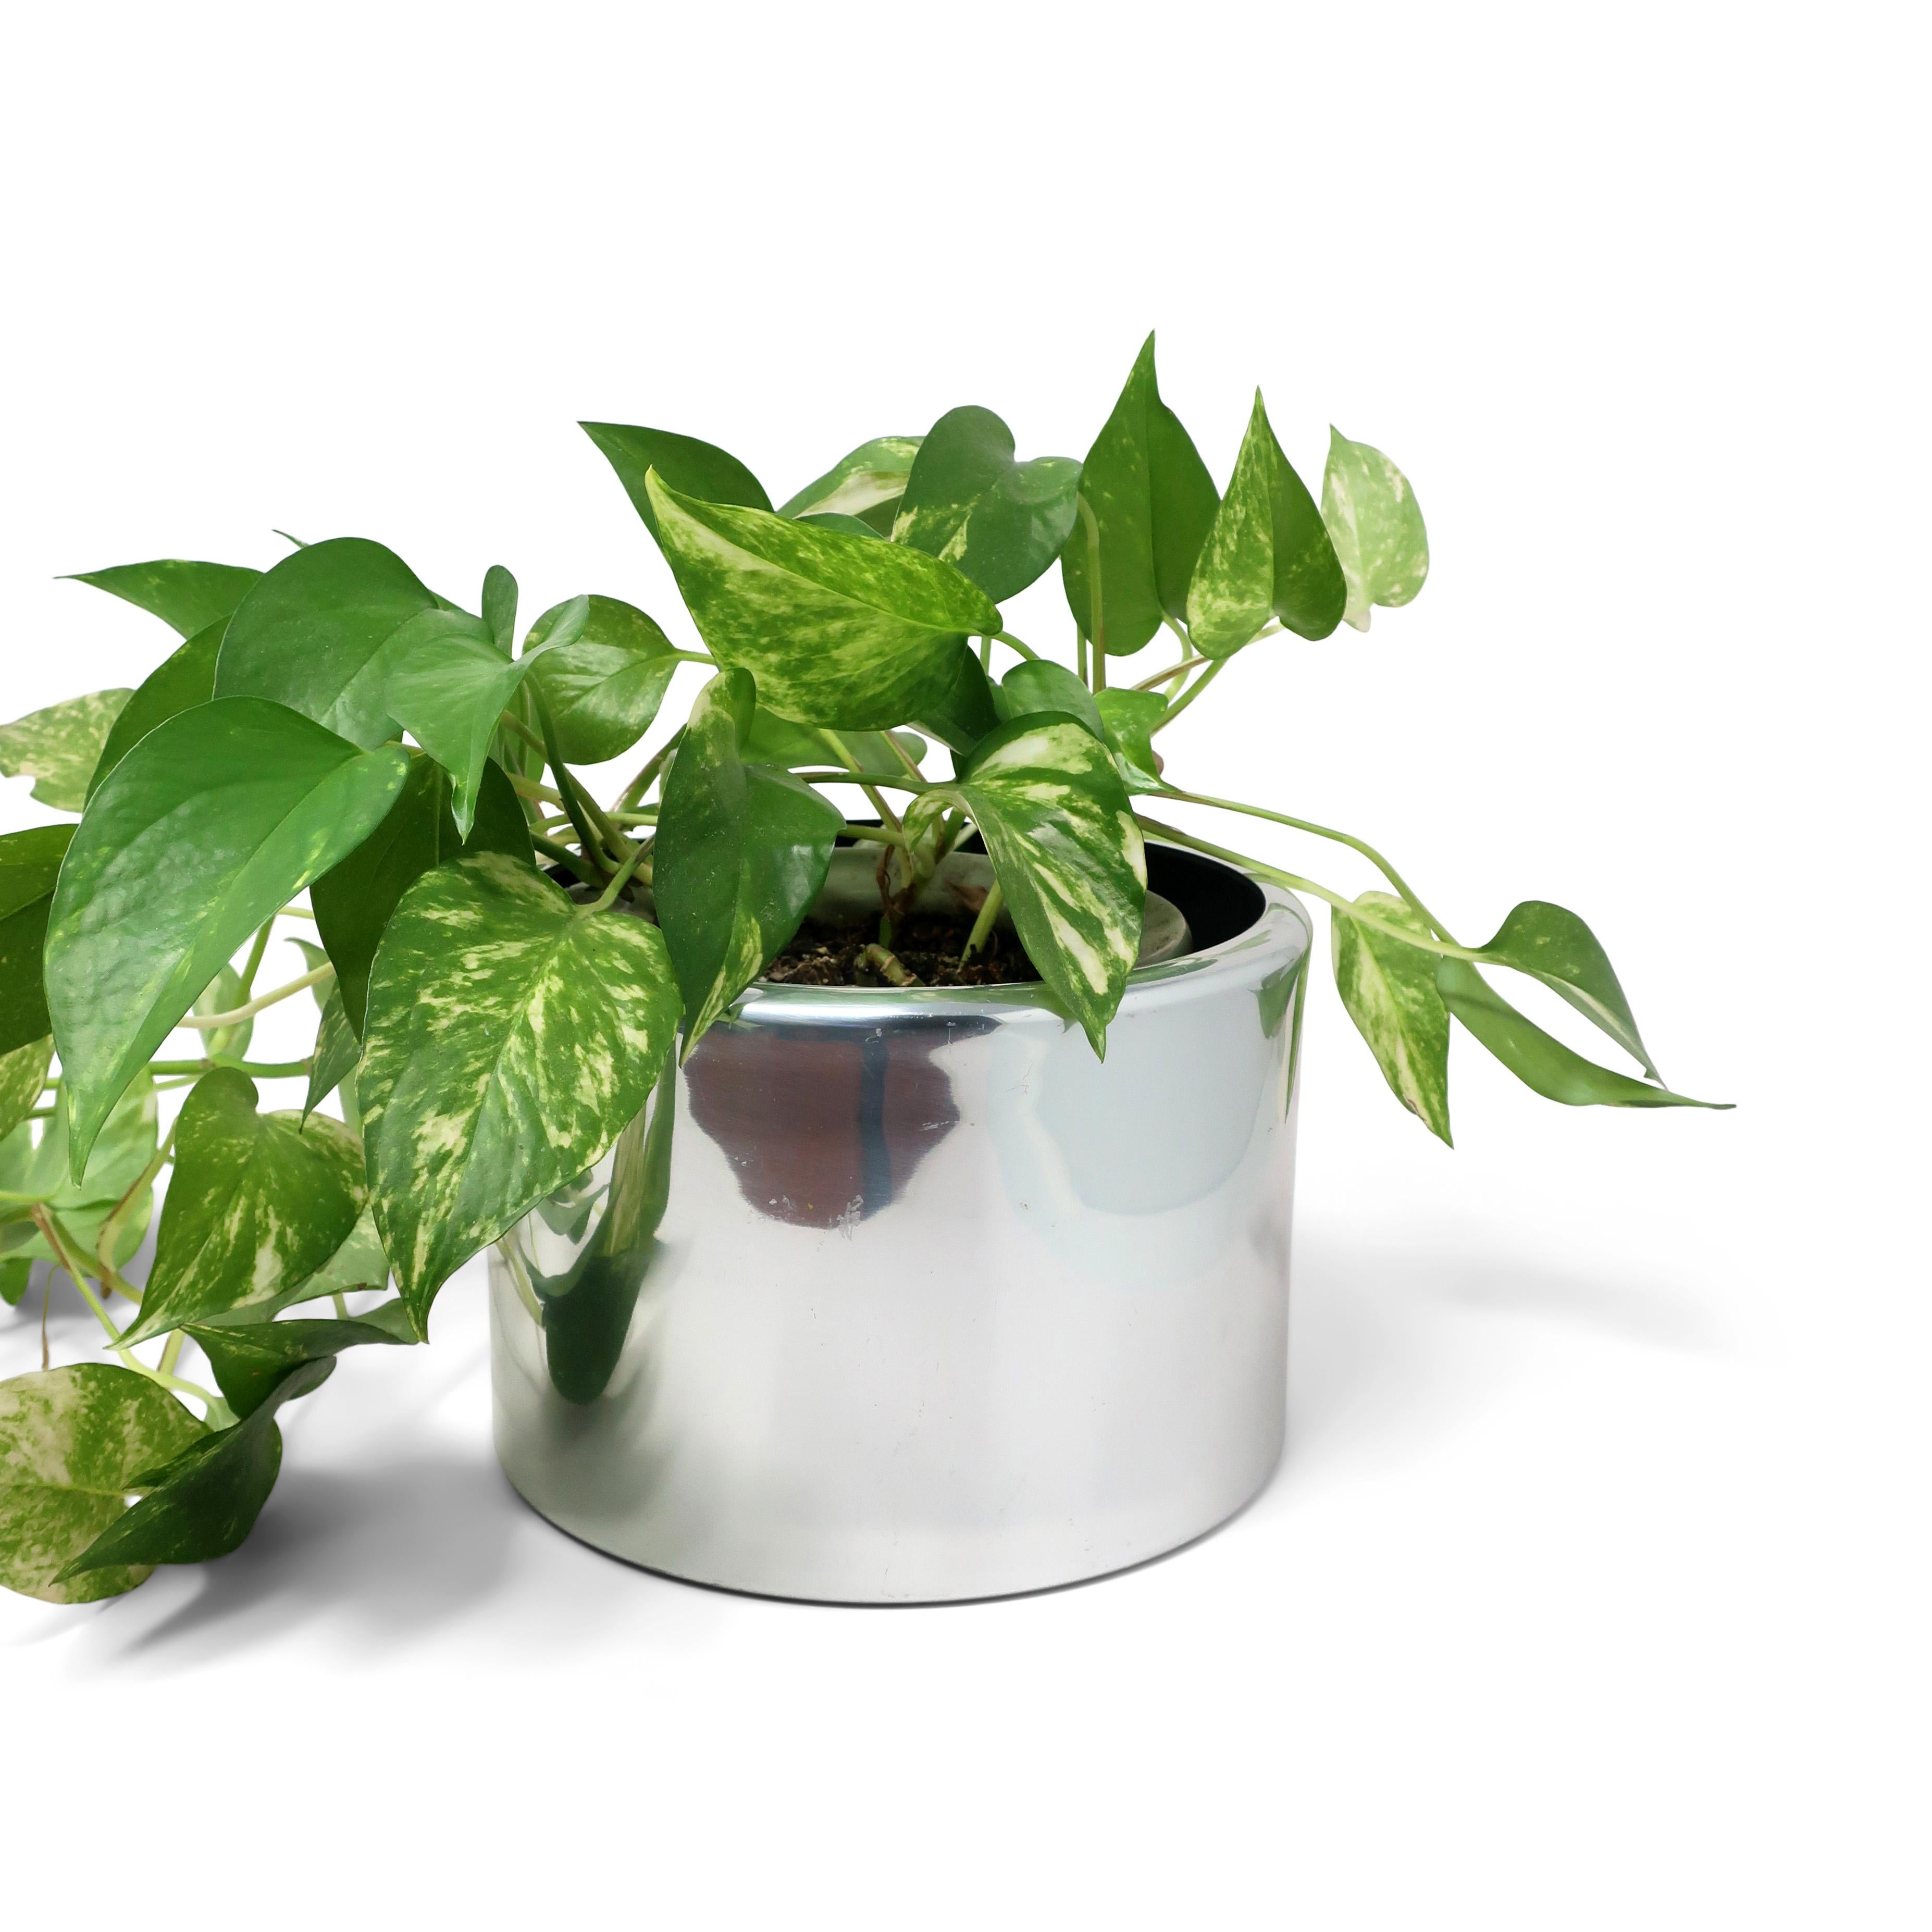 Add some retro swagger to your home with this stunning polished aluminum planter designed by Paul Mayen, a renowned architect and industrial designer who founded Habitat in 1953.  Habitat, the maker of this planter, was known for creating innovative